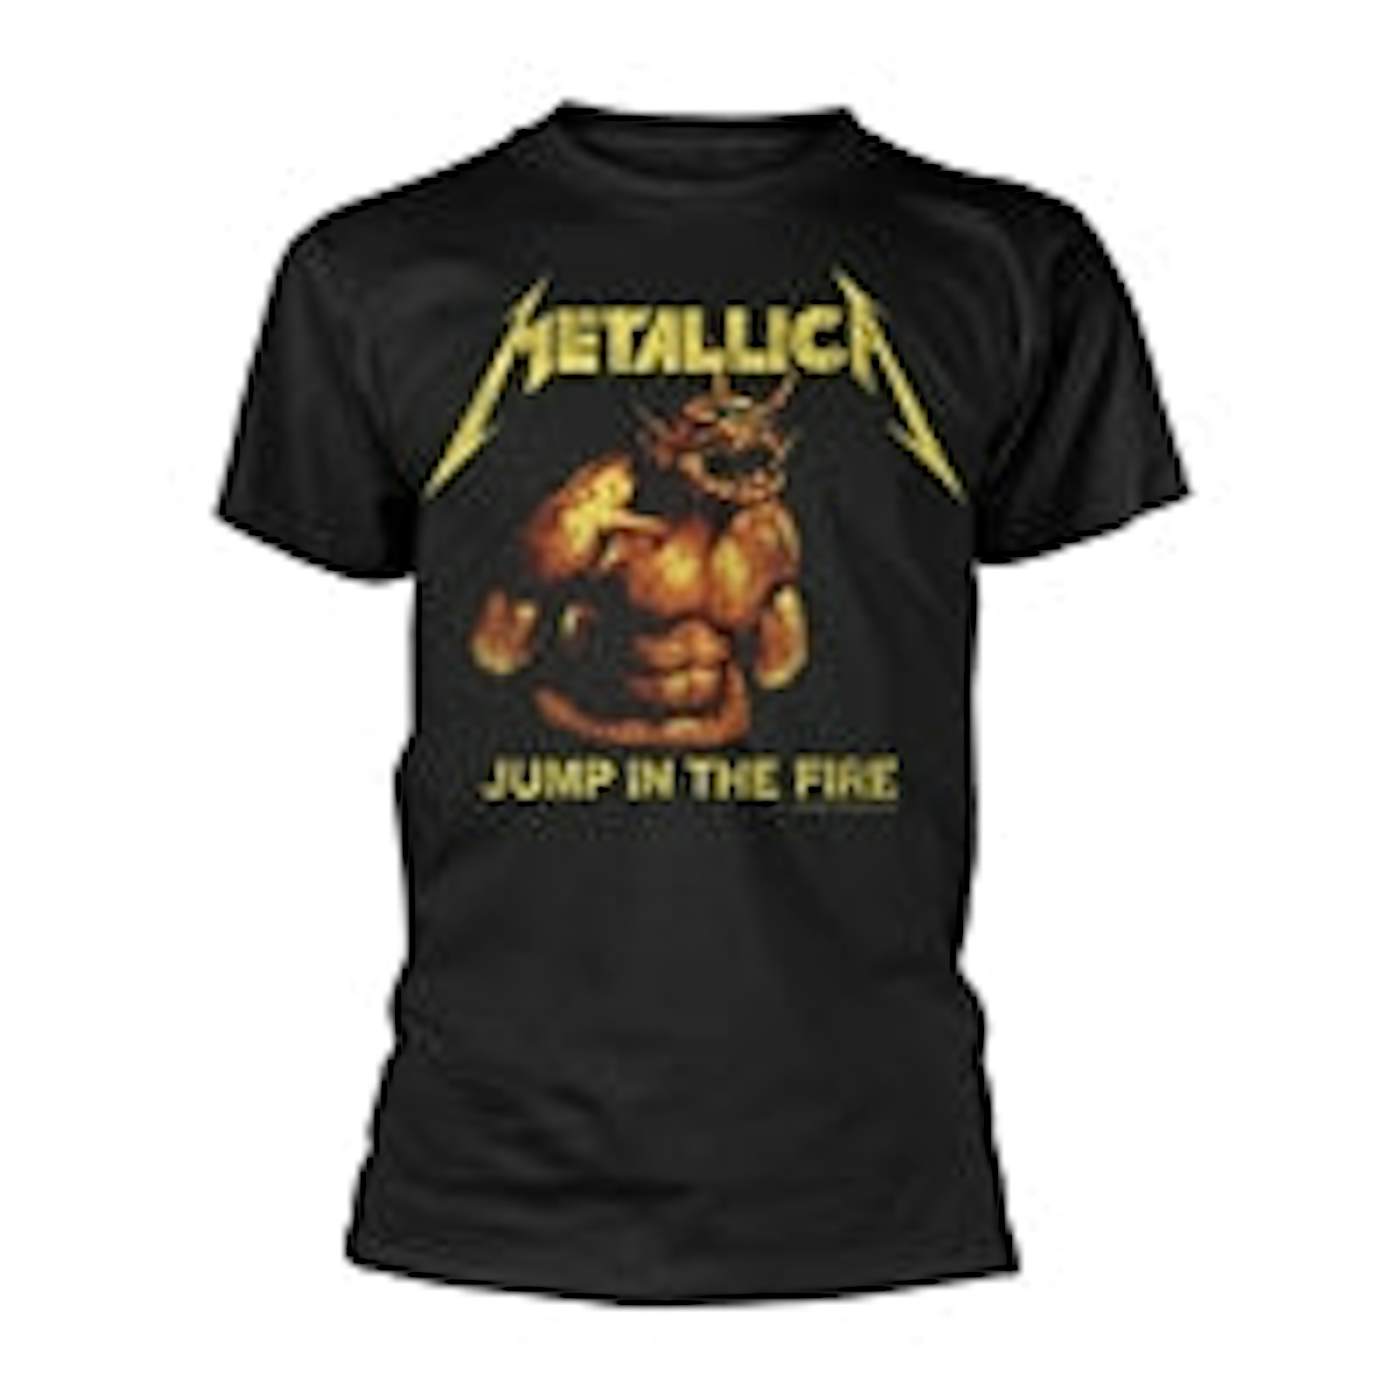 Metallica T Shirt - Jump In The Fire Vintage